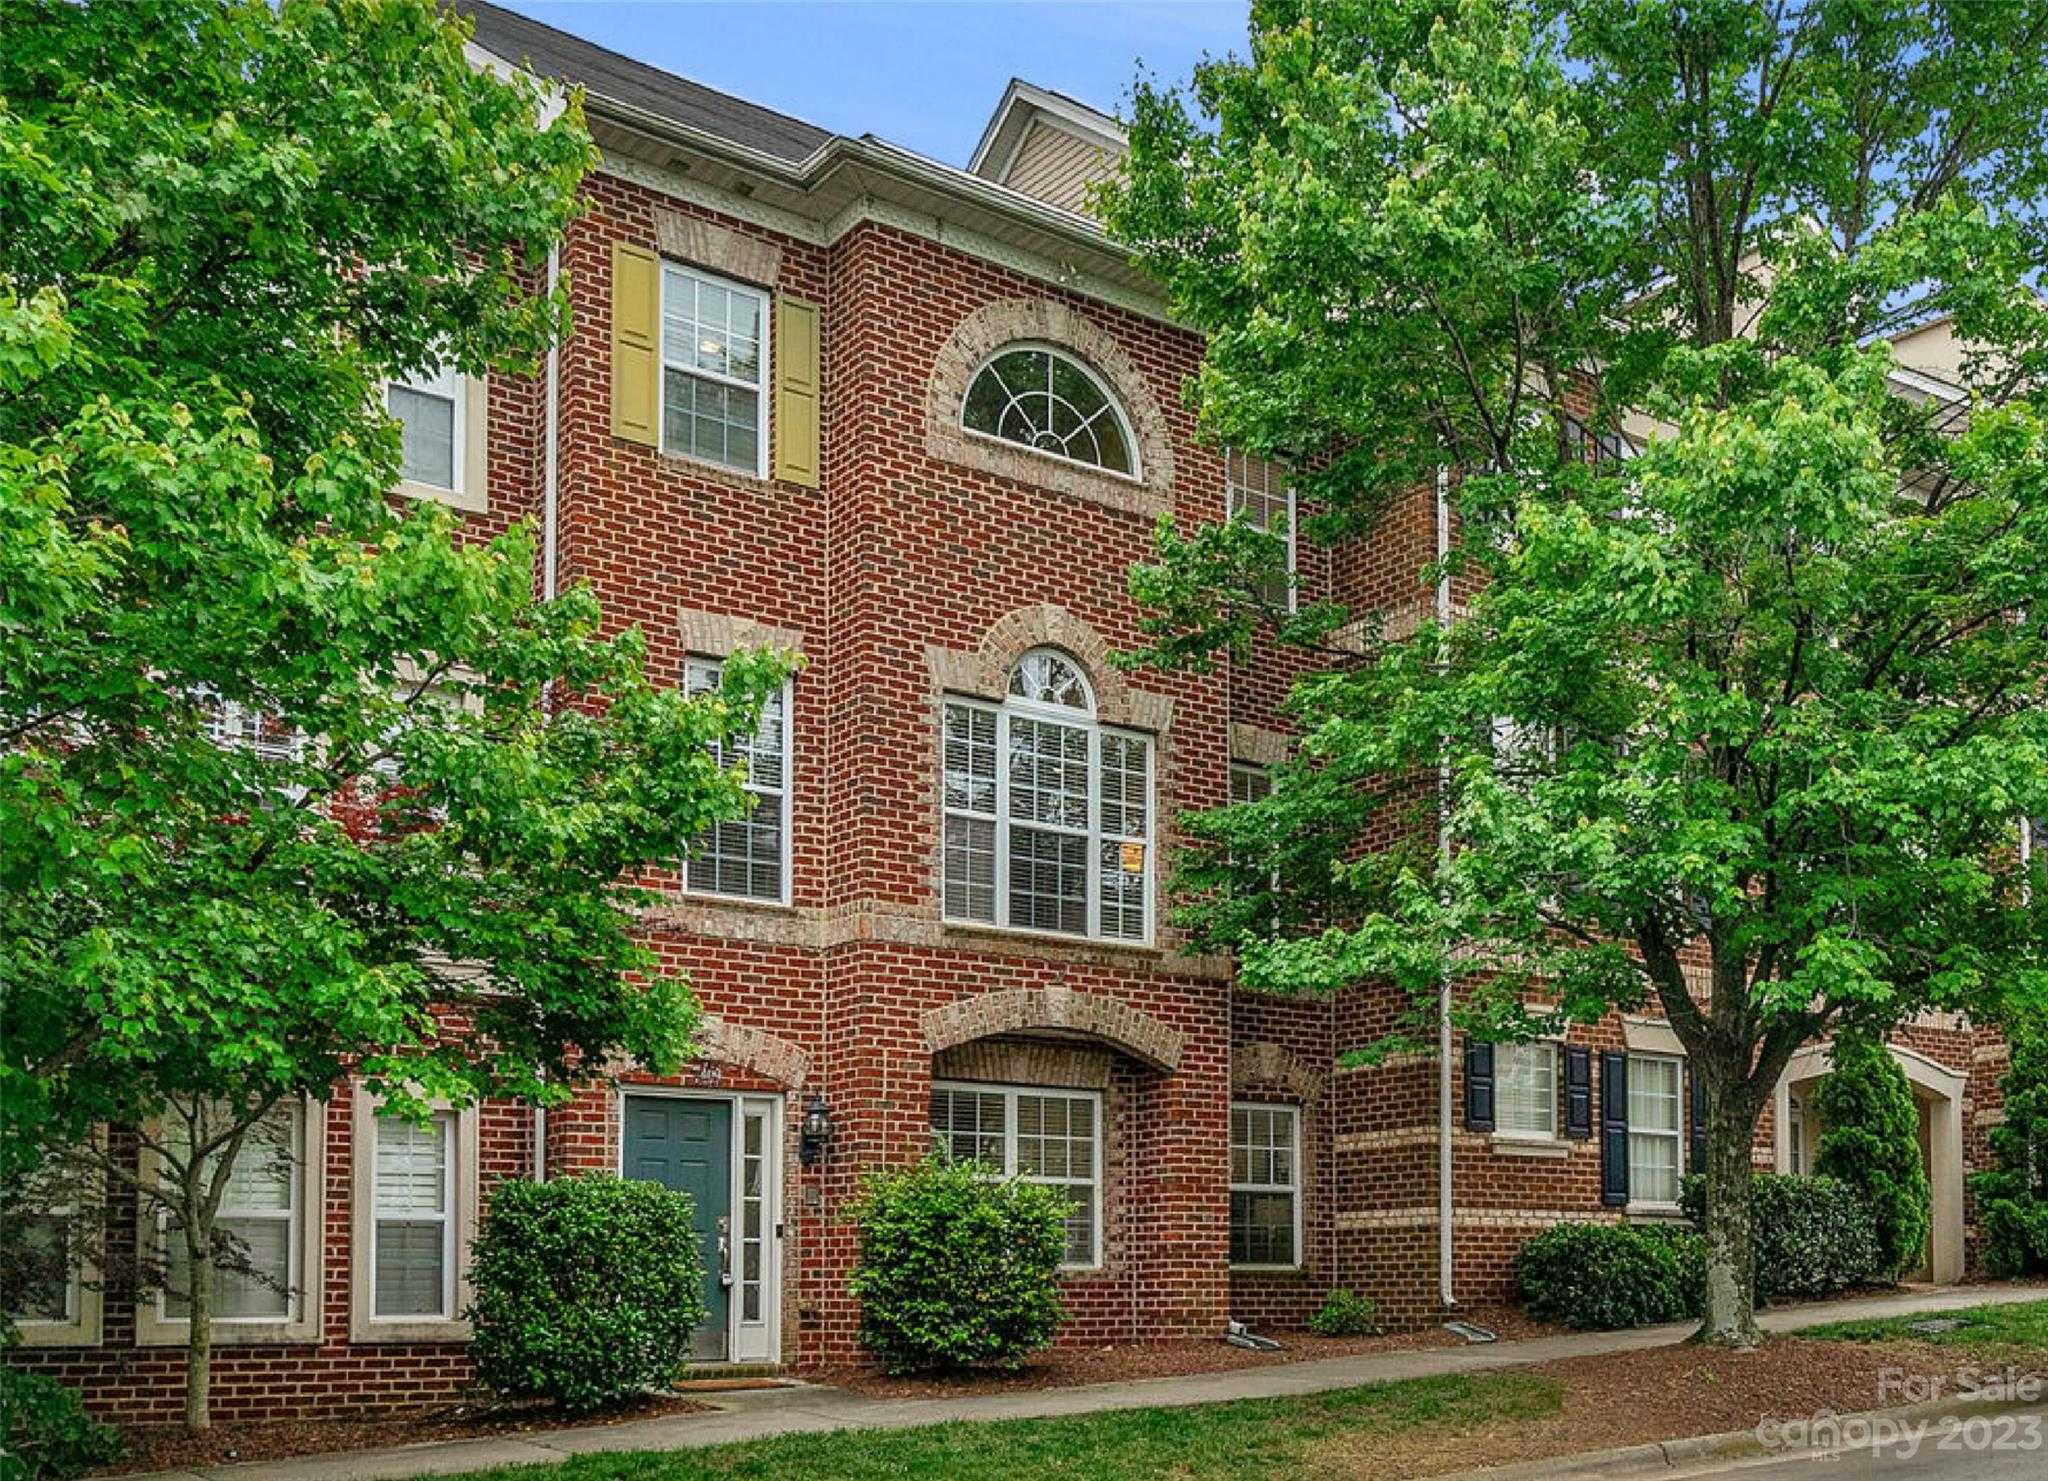 View Charlotte, NC 28273 townhome